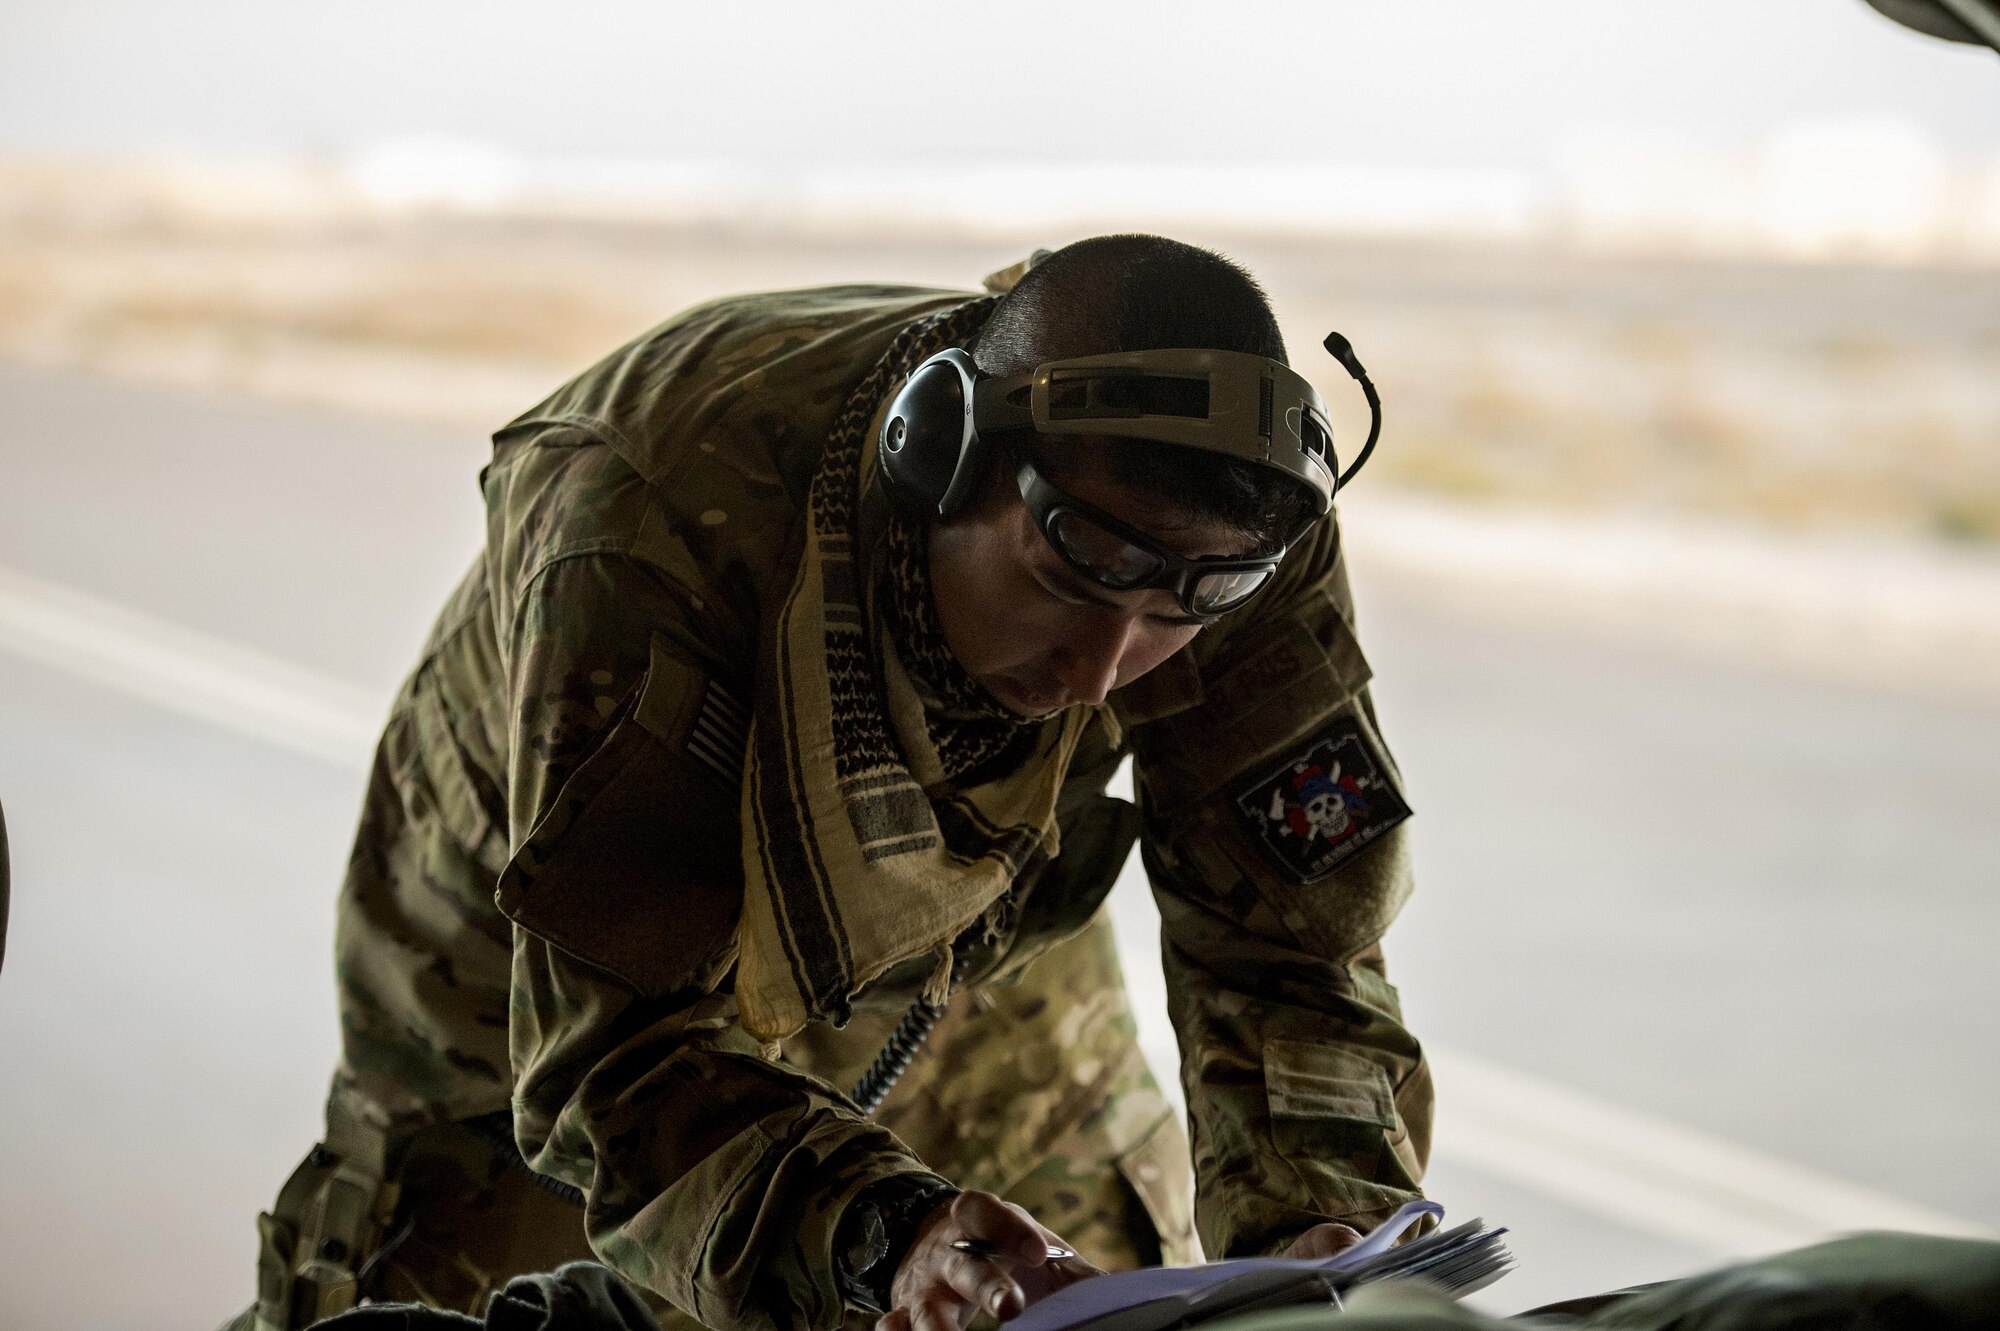 U.S. Air Force Staff Sgt. Joshua Ritter, 379th Expeditionary Aeromedical Evacuation Squadron medical technician, takes inventory of an injured Airman's bags in support of Operation Inherent Resolve at an undisclosed location in Southwest Asia, Jan. 6, 2016. OIR is the coalition intervention against the Islamic State of Iraq and the Levant. (U.S. Air Force photo by Tech. Sgt. Nathan Lipscomb)